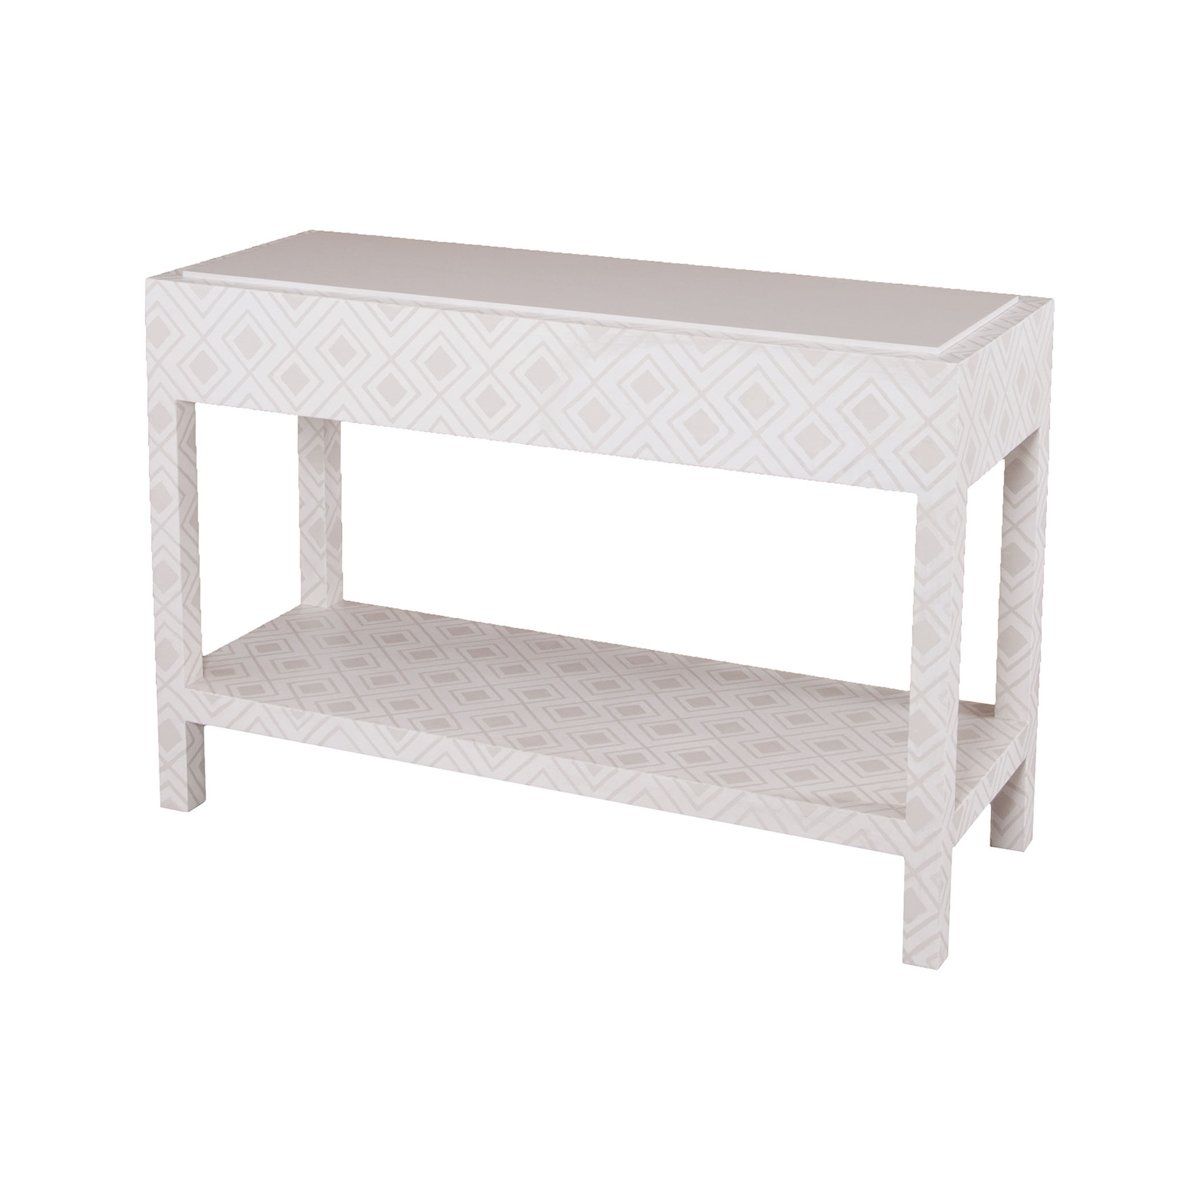 Kent Fabric Wrapped Console | Products In 2018 | Pinterest With Parsons Clear Glass Top & Elm Base 48x16 Console Tables (View 13 of 30)